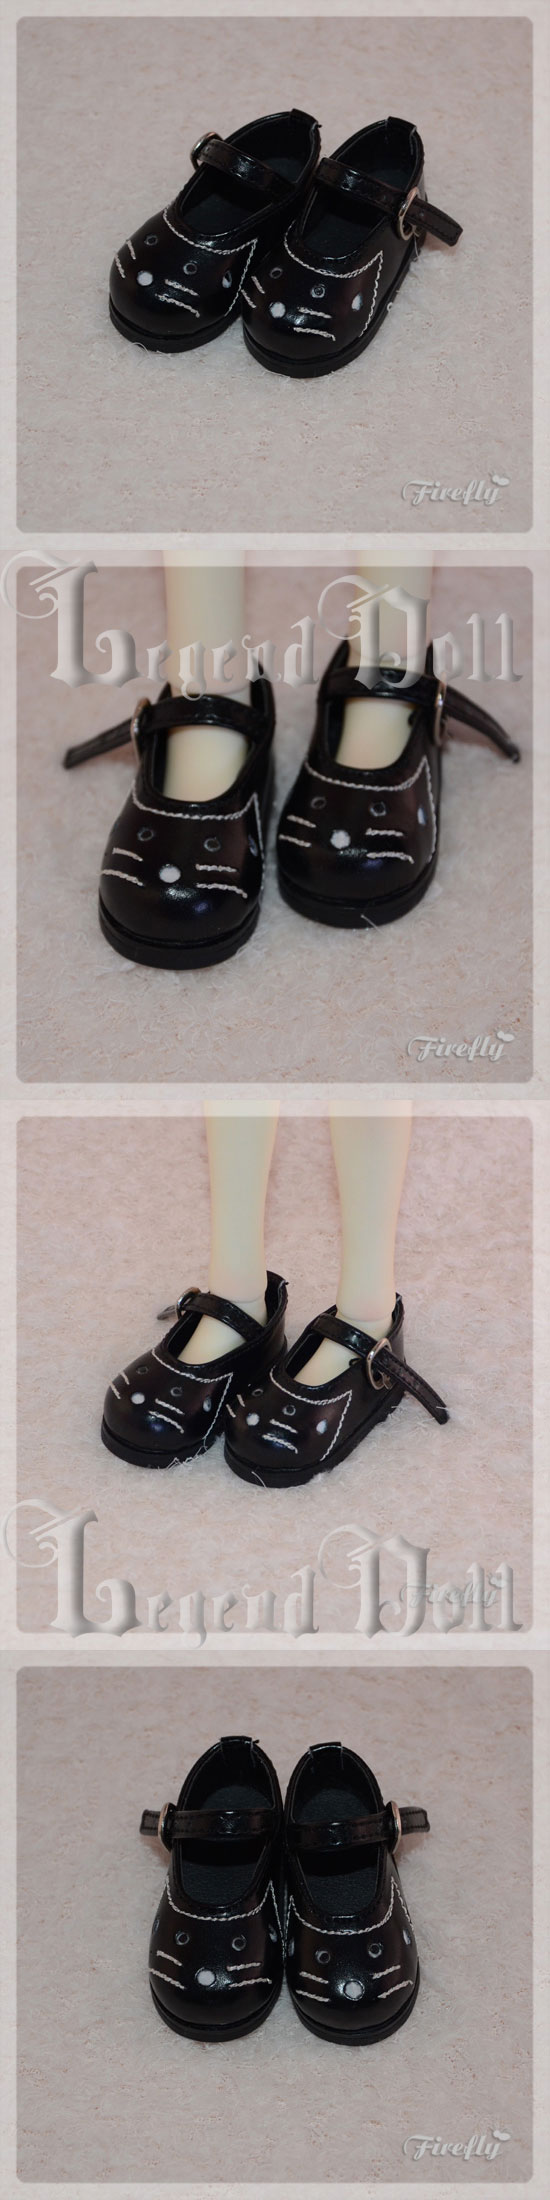 BJD Shoes45-06 for MSD Ball-jointed Doll